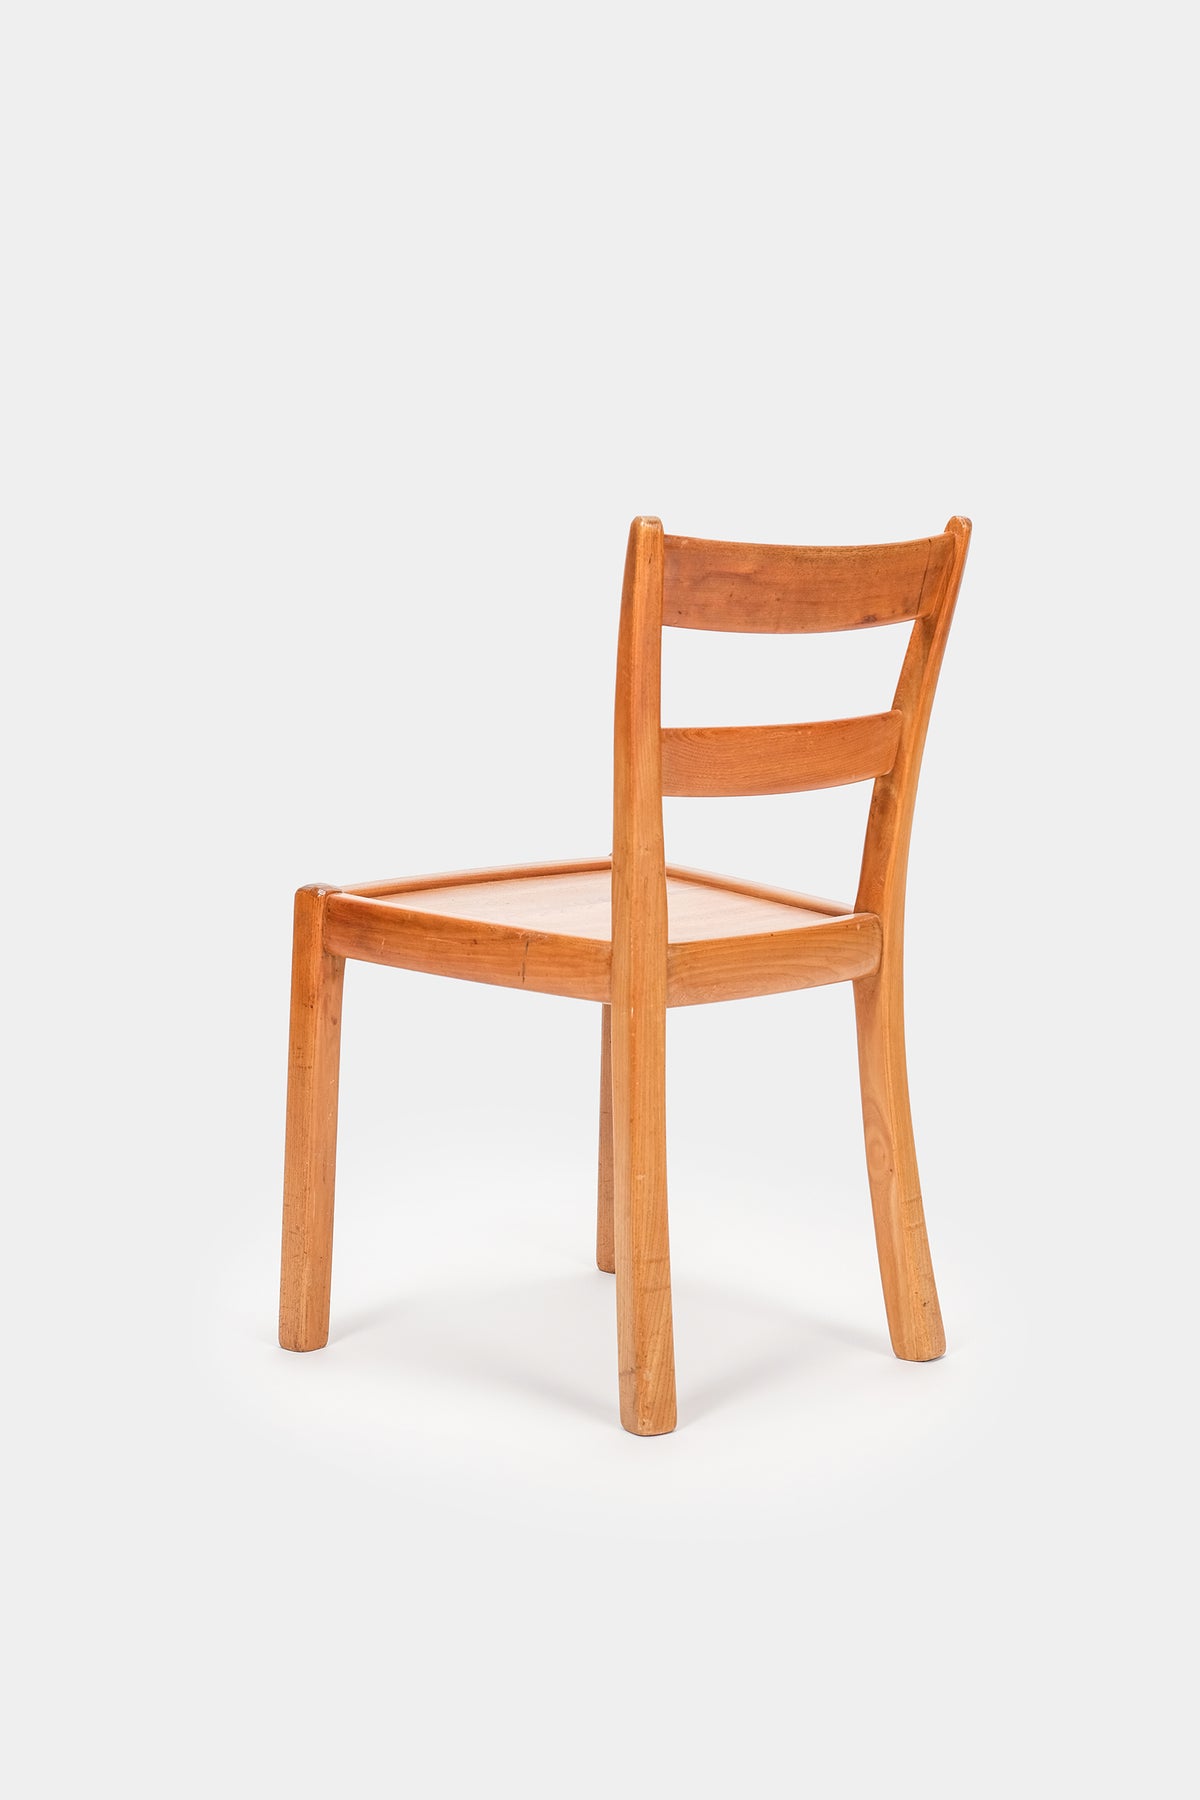 Franz Xaver Sproll, Chair made by hand, 40s